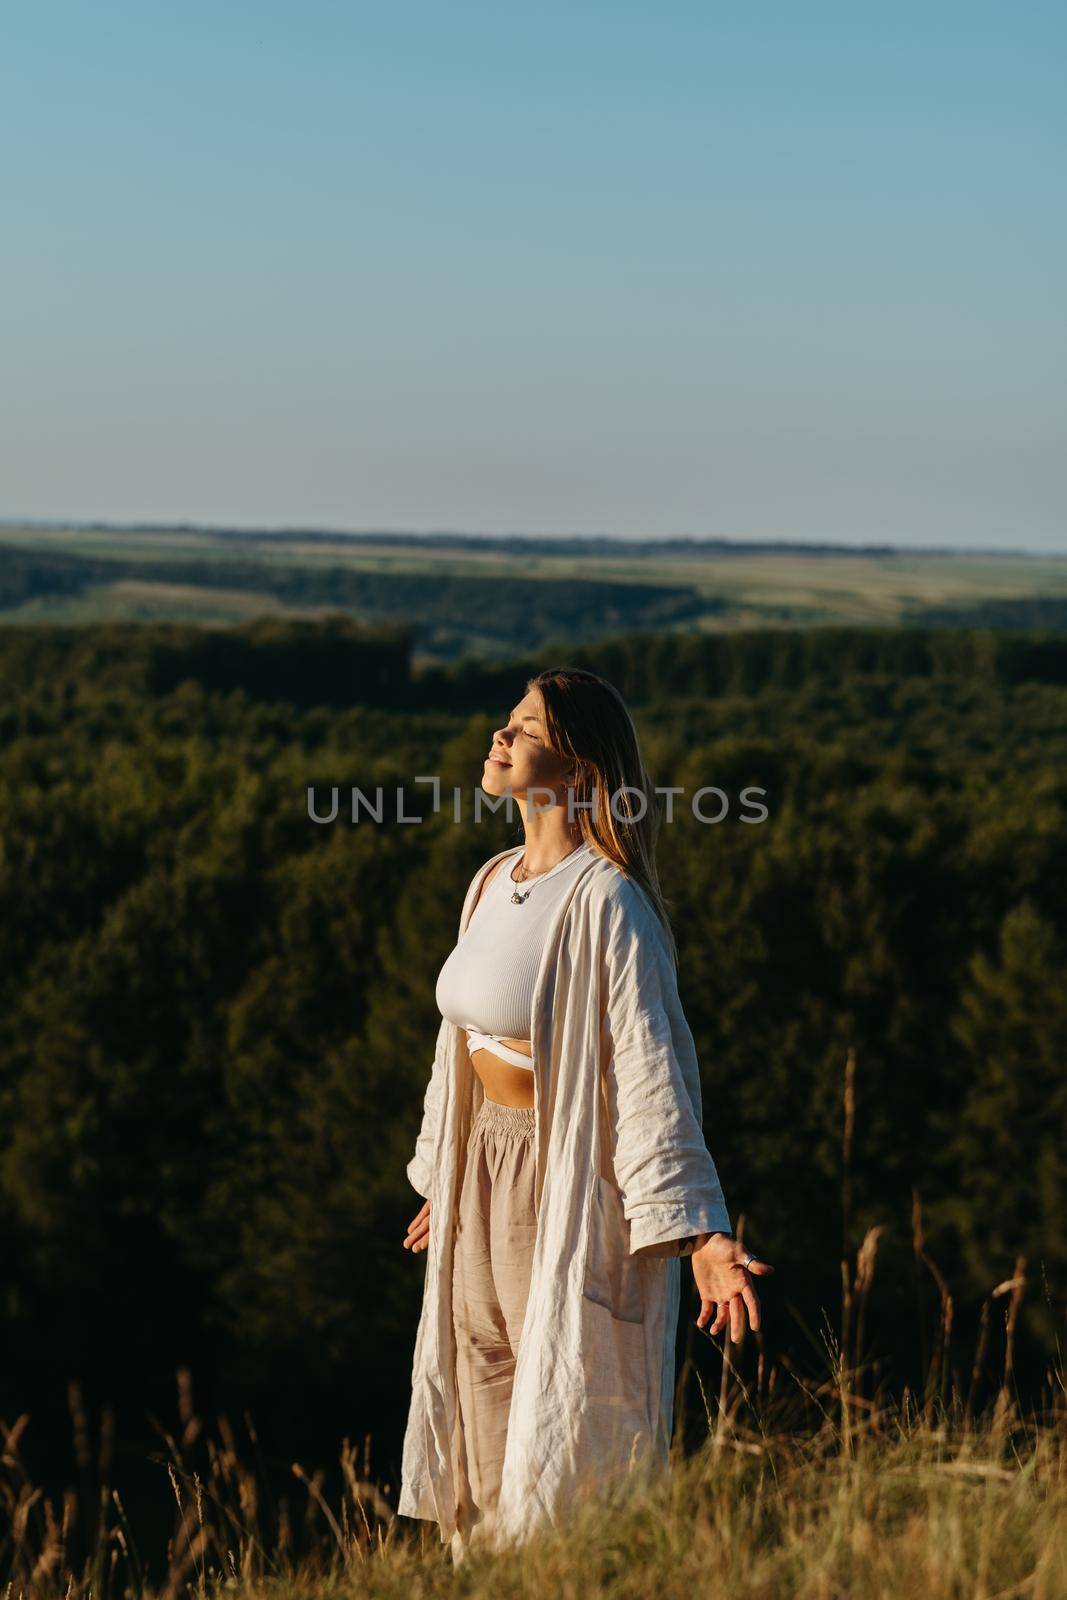 Young Woman Meditating and Catching Sunlight Outdoors at Sunset with Scenic Landscape on the Background by Romvy